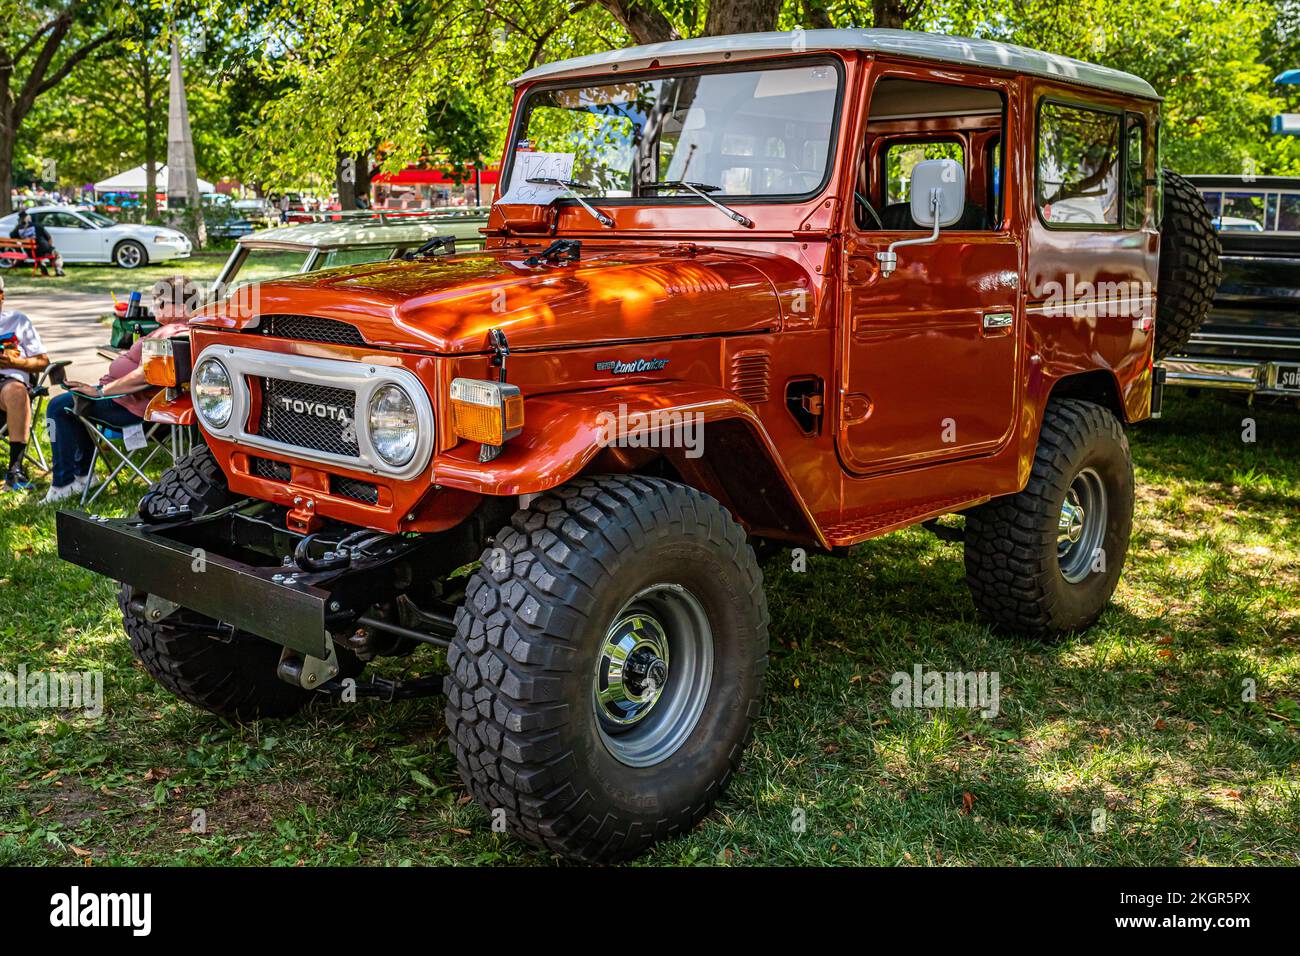 Des Moines, IA - July 03, 2022: High perspective front corner view of a 1976 Toyota Land Cruiser FJ40 at a local car show. Stock Photo